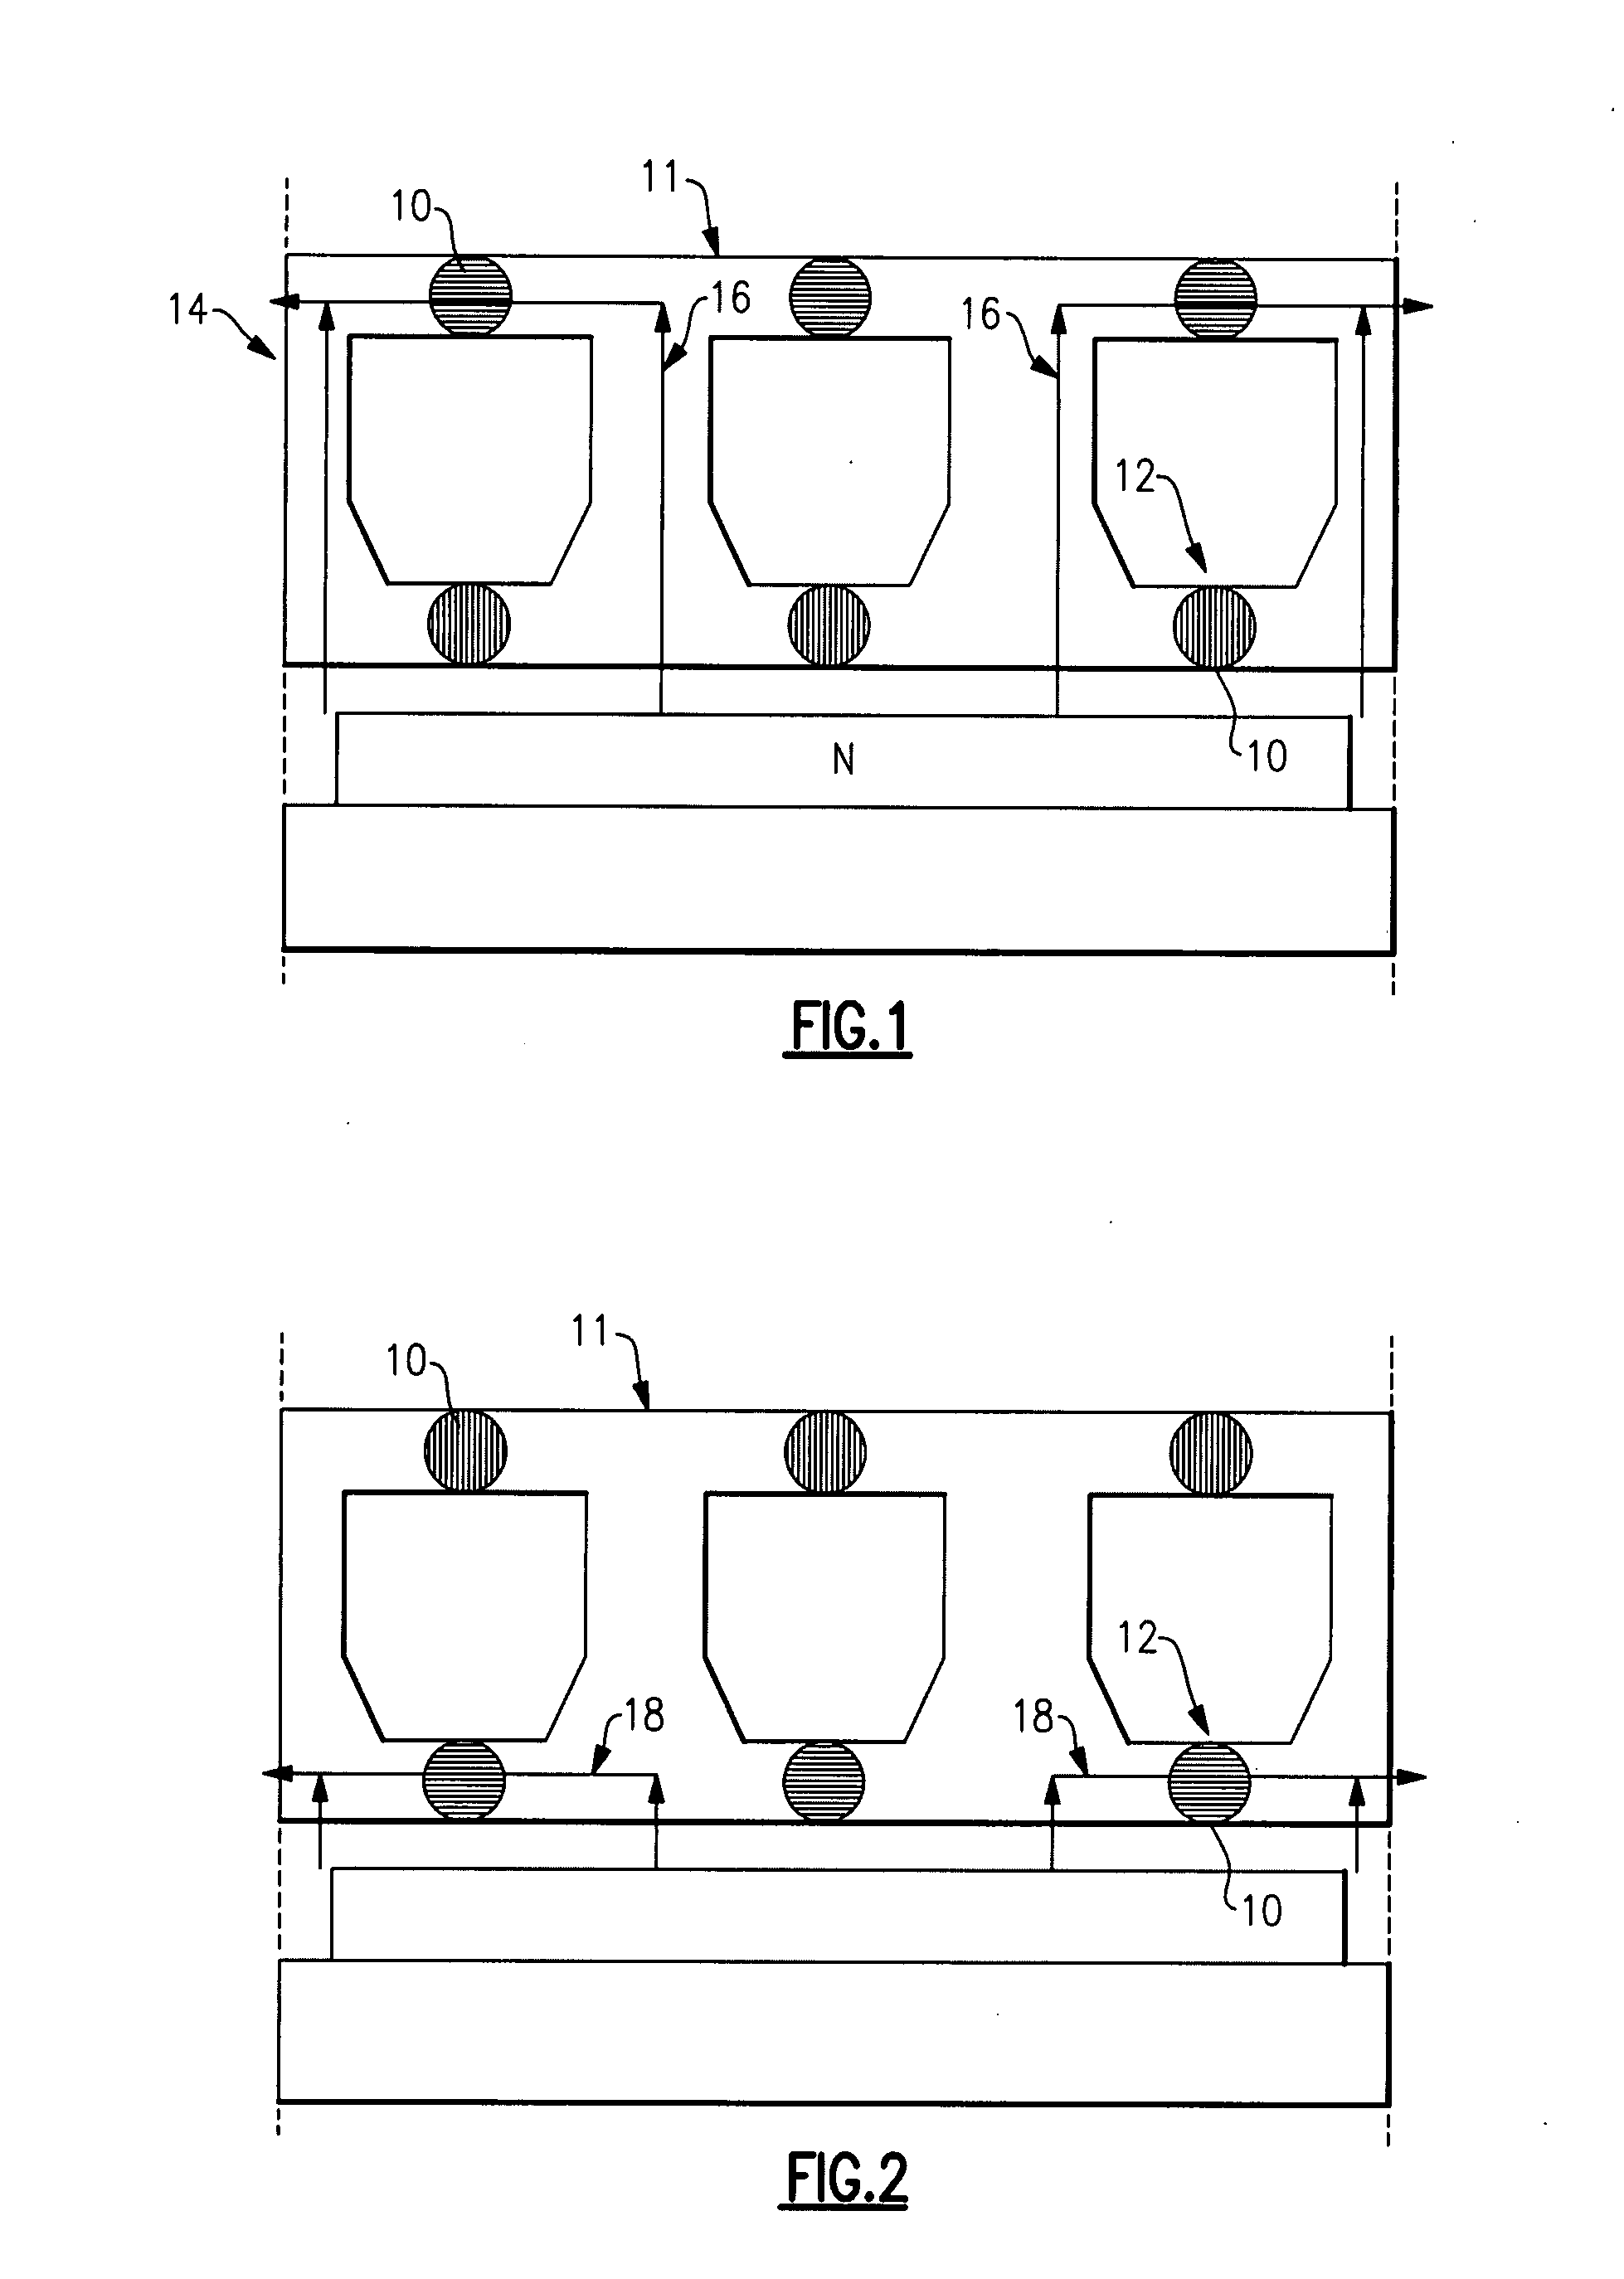 Fault-tolerant permanent magnet machine with reconfigurable stator core slot opening and back iron flux paths